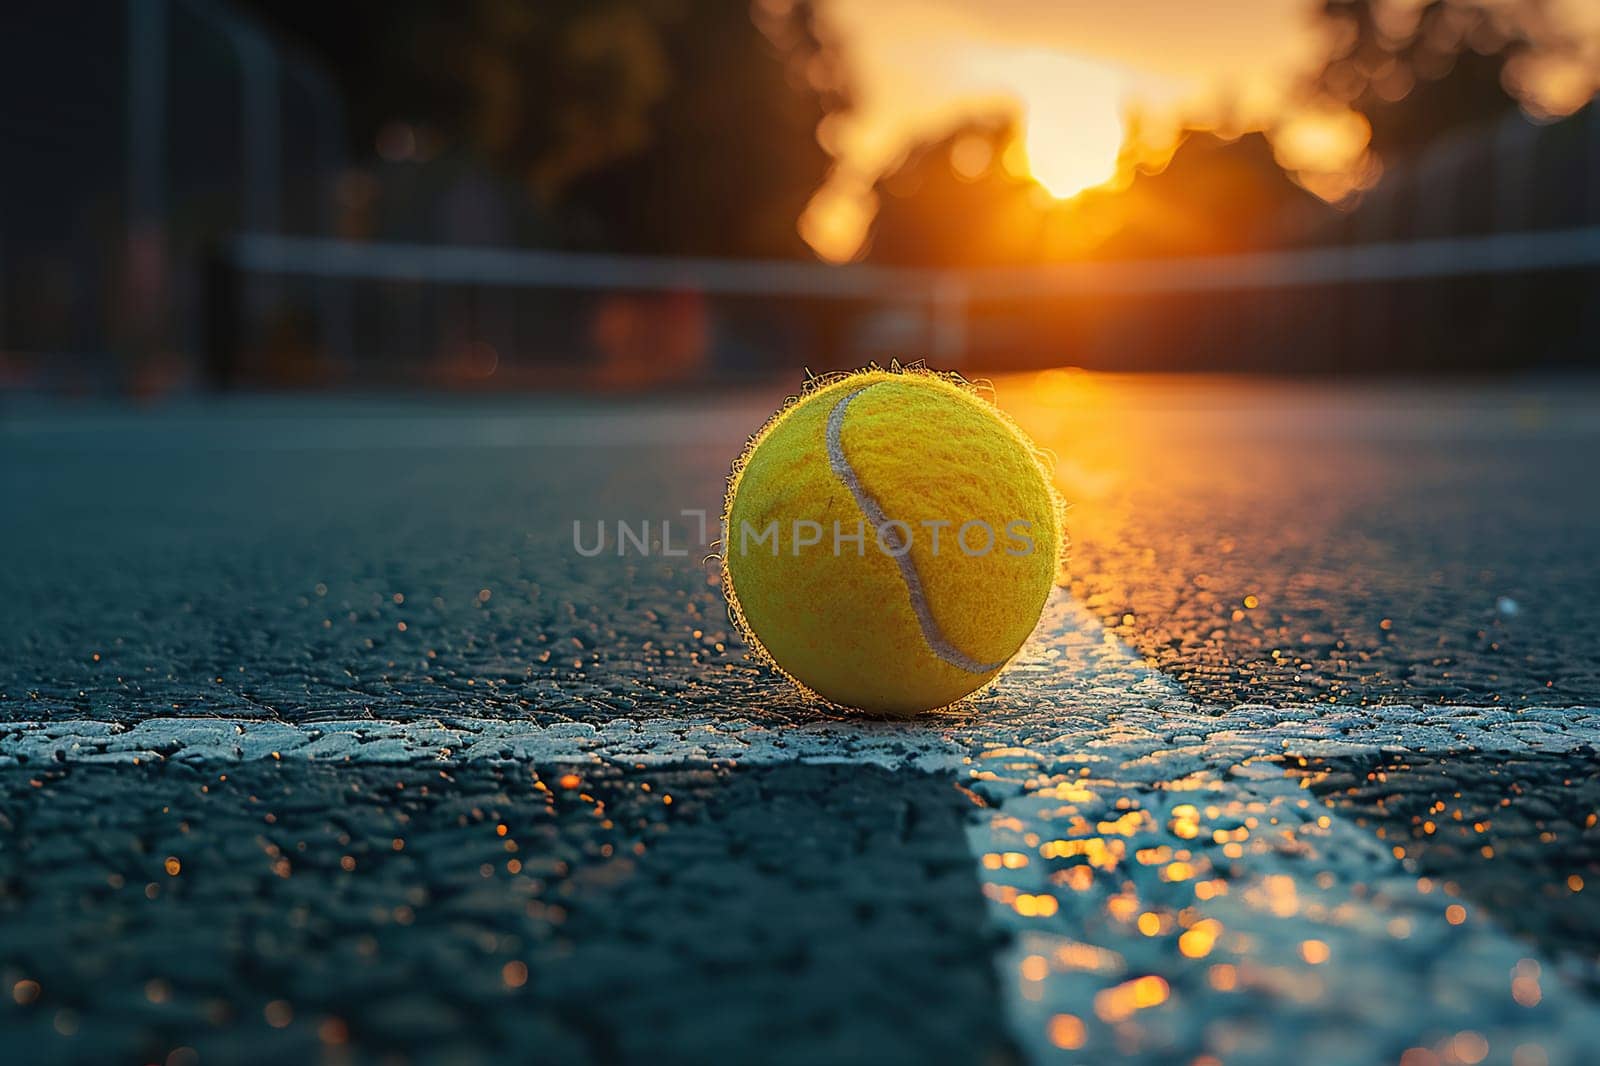 Close-up of a tennis ball on a tennis court at sunset. Generated by artificial intelligence by Vovmar